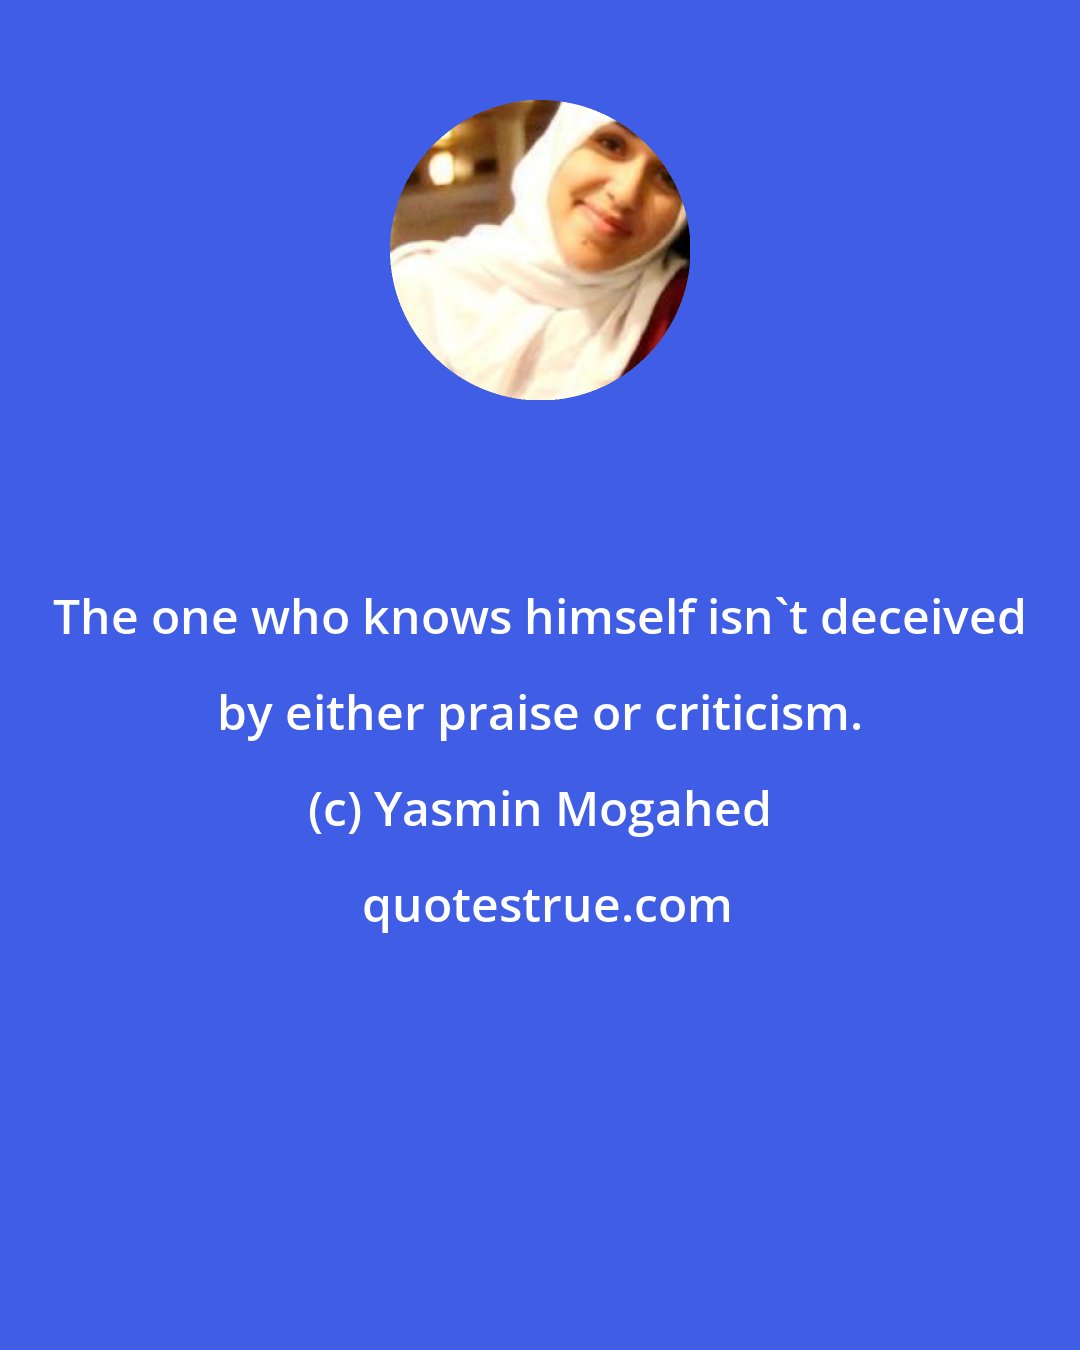 Yasmin Mogahed: The one who knows himself isn't deceived by either praise or criticism.